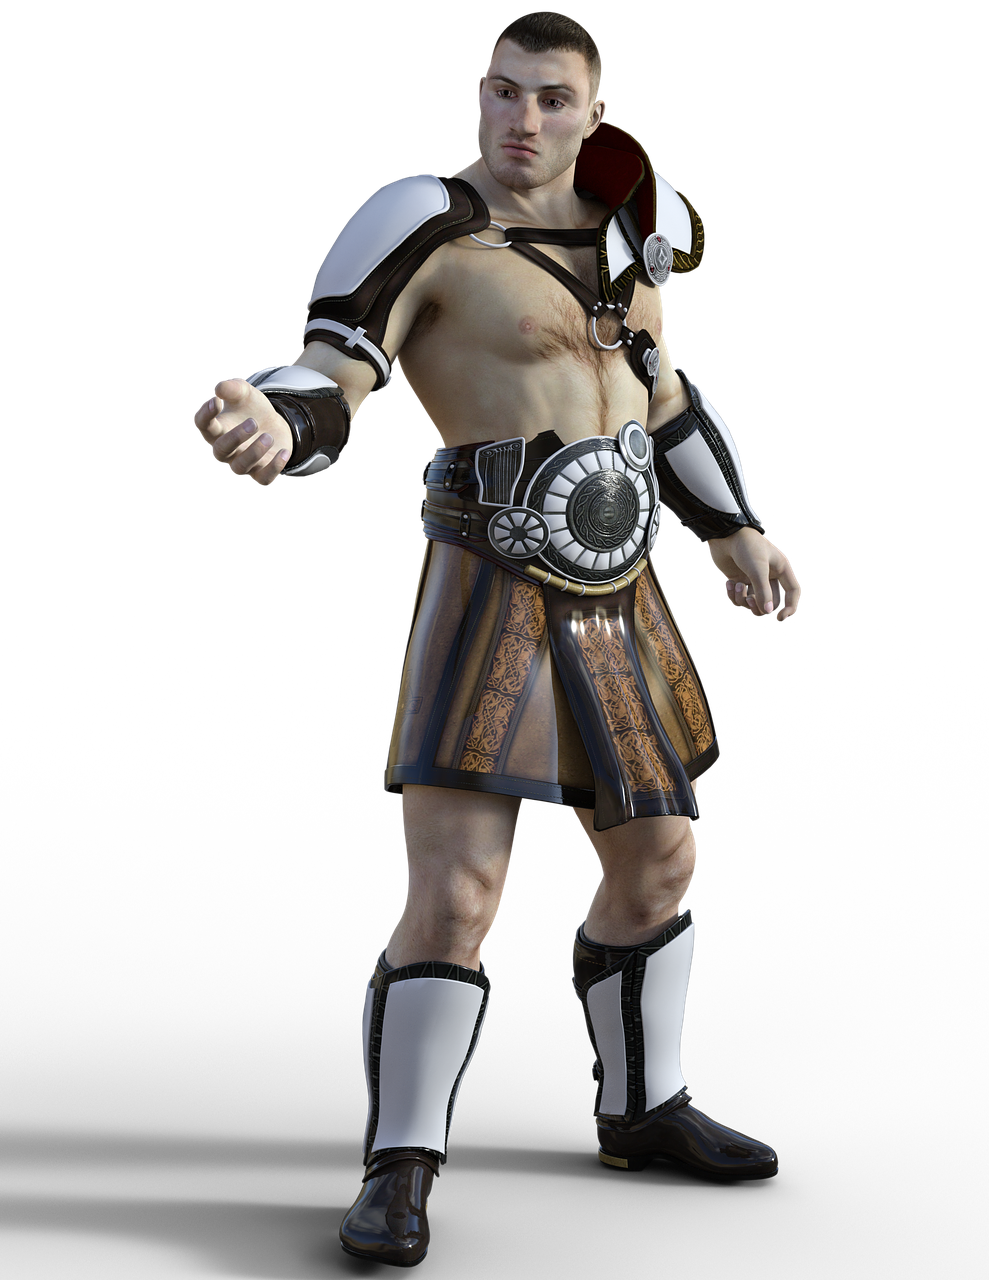 a man dressed in armor poses for a picture, inspired by Dai Jin, zbrush central contest winner, renaissance, heroic muay thai stance pose, roman gladiator, john cena, 3 d render of jerma 9 8 5